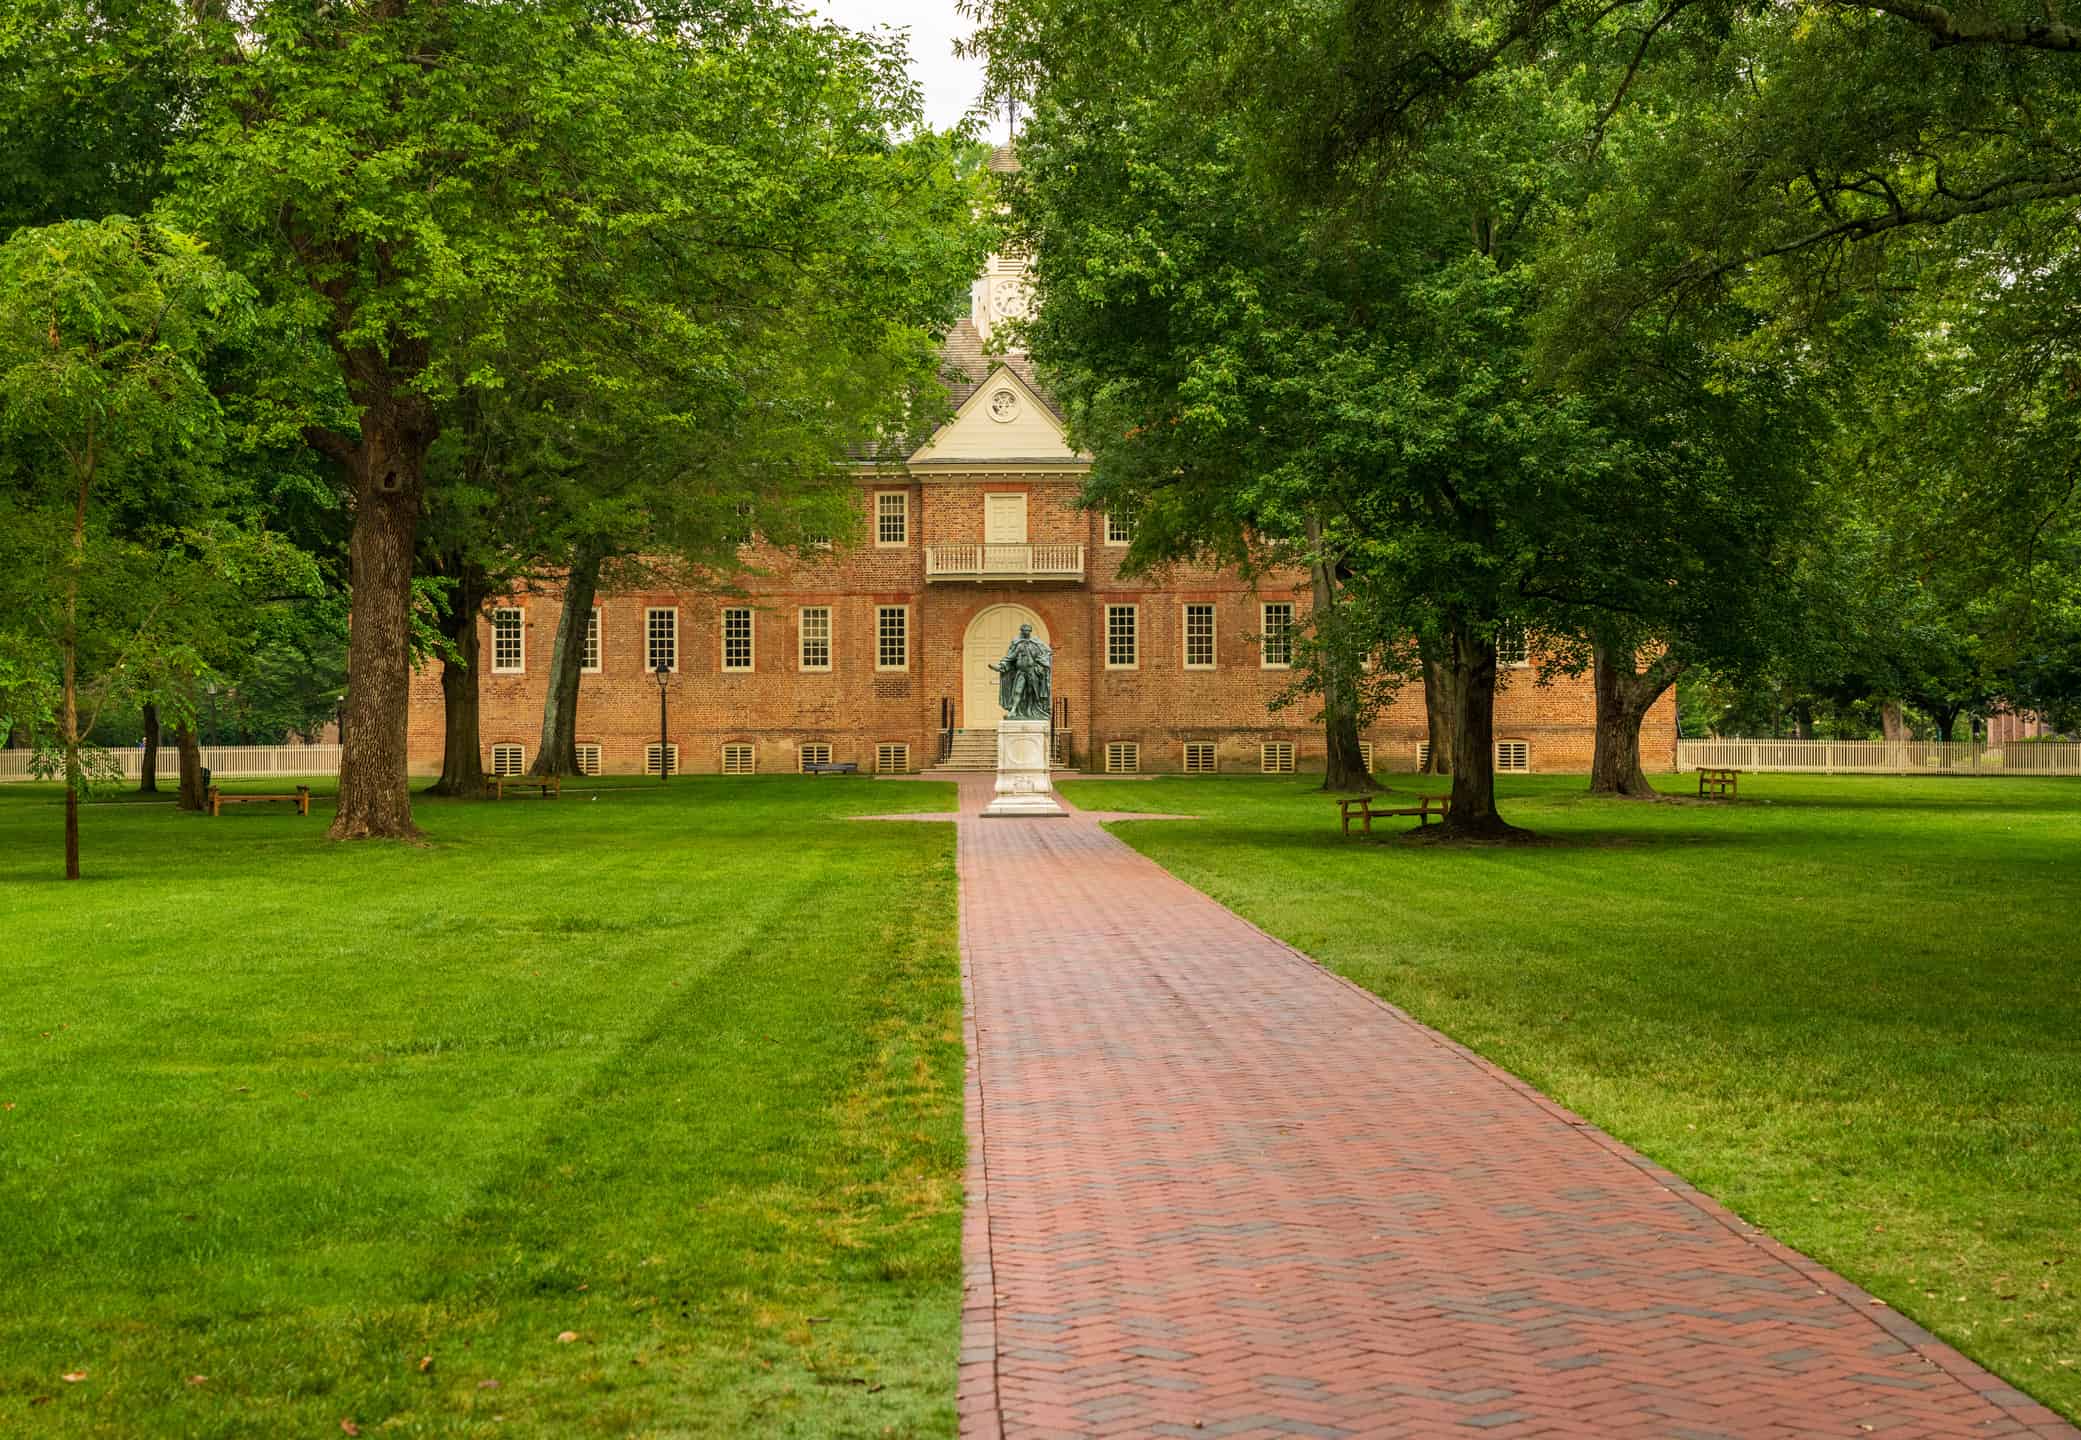 Wren Hall at William and Mary college in Williamsburg Virginia